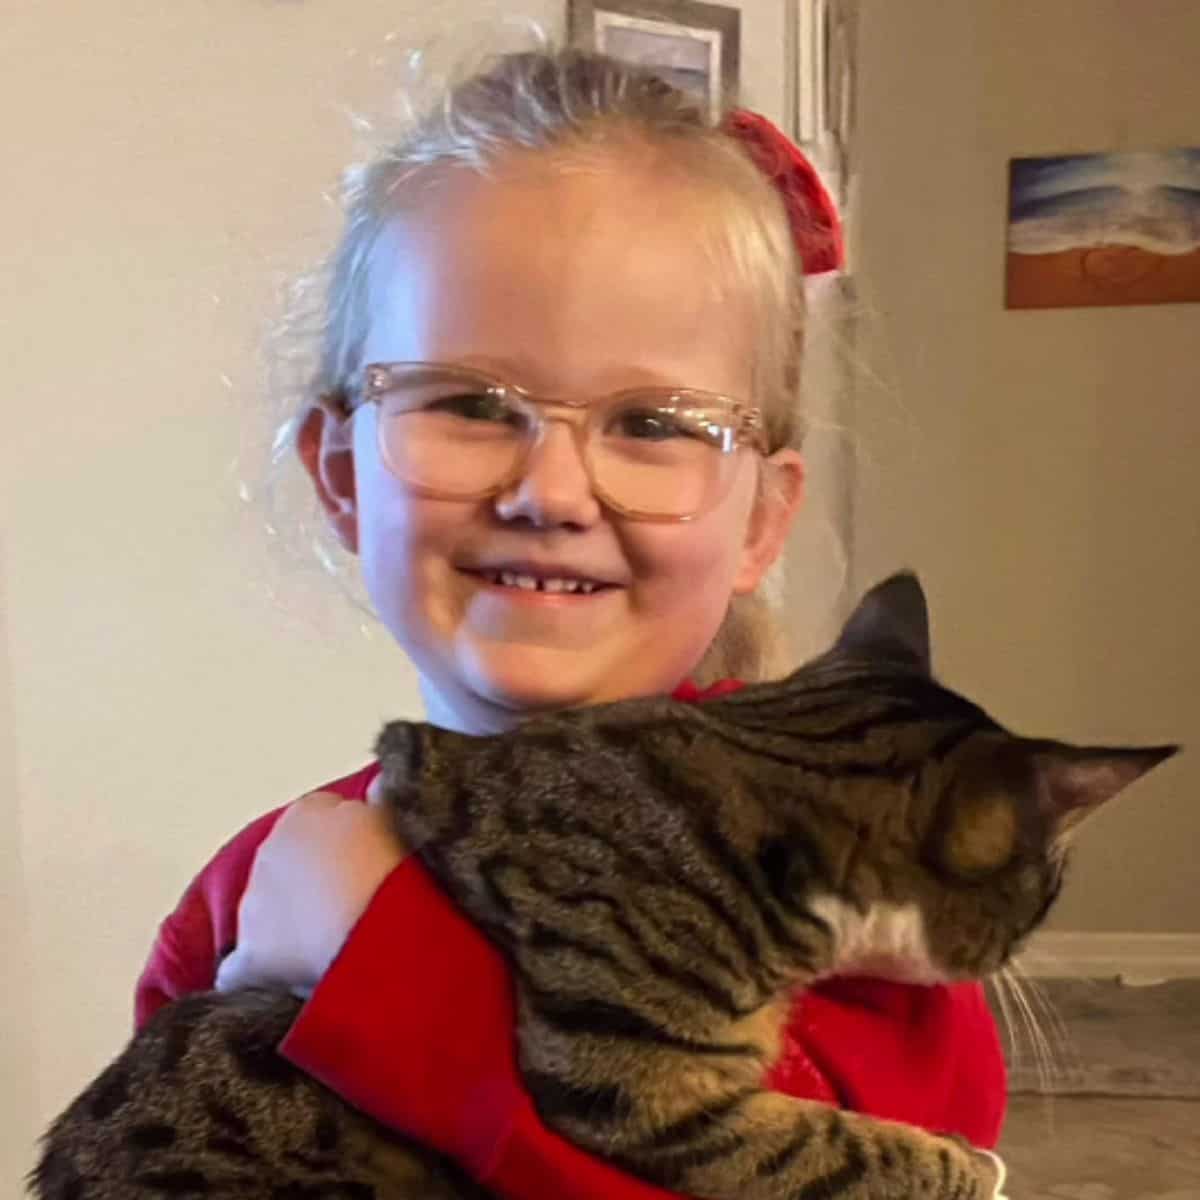 smiling little girl holding a cat in arms